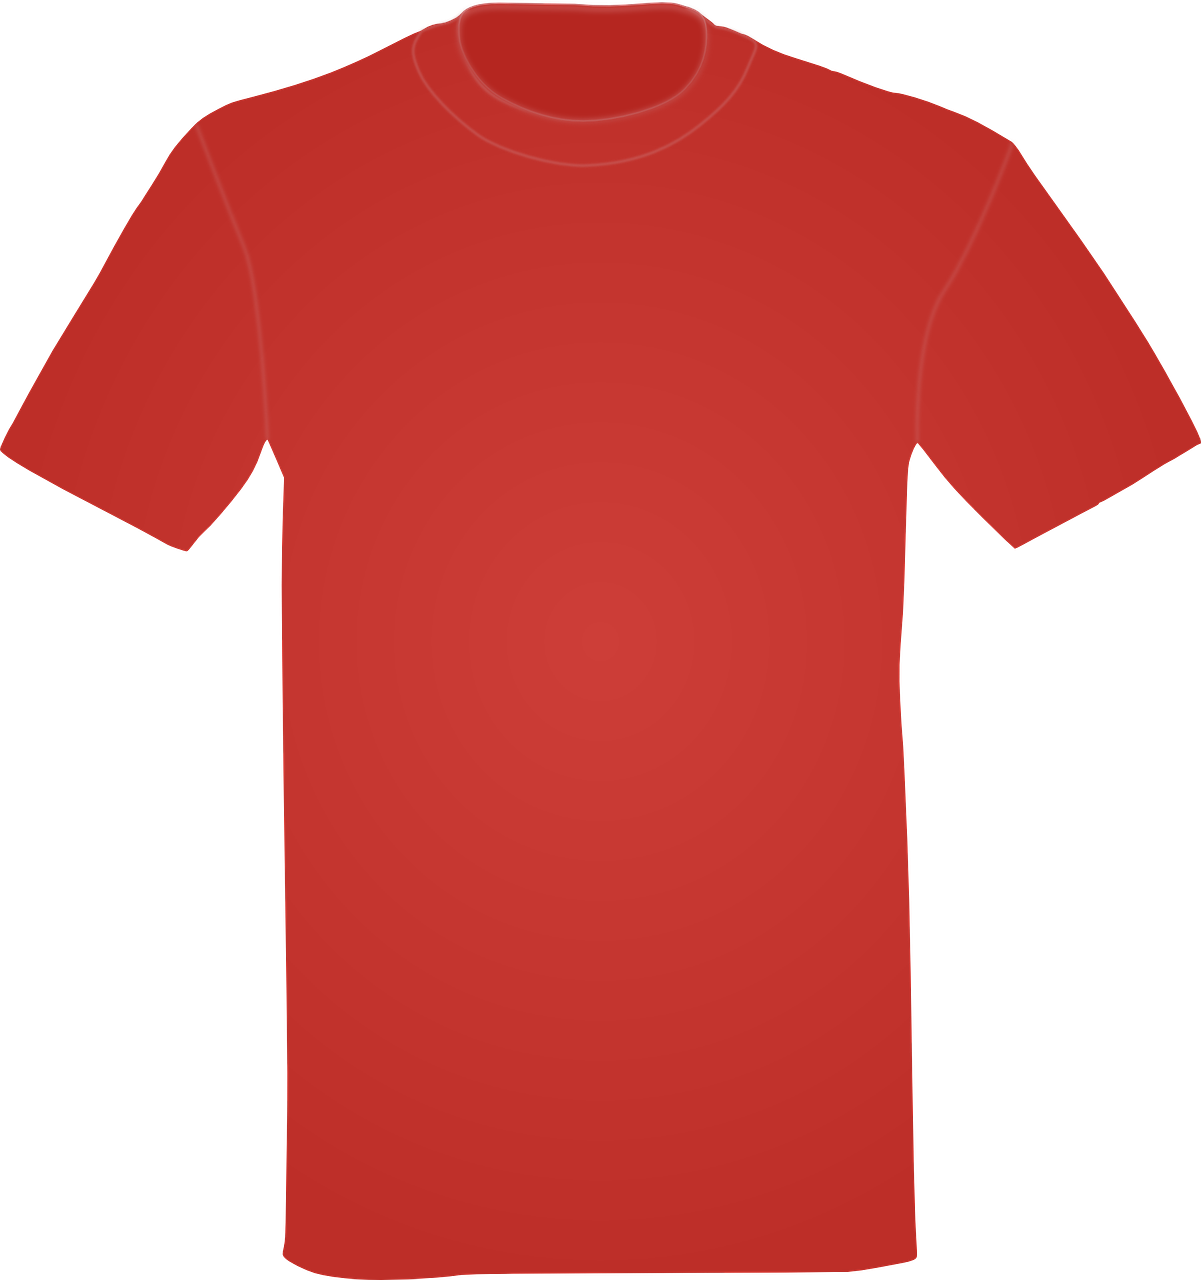 Download Plain Red T Shirt Graphic | Wallpapers.com